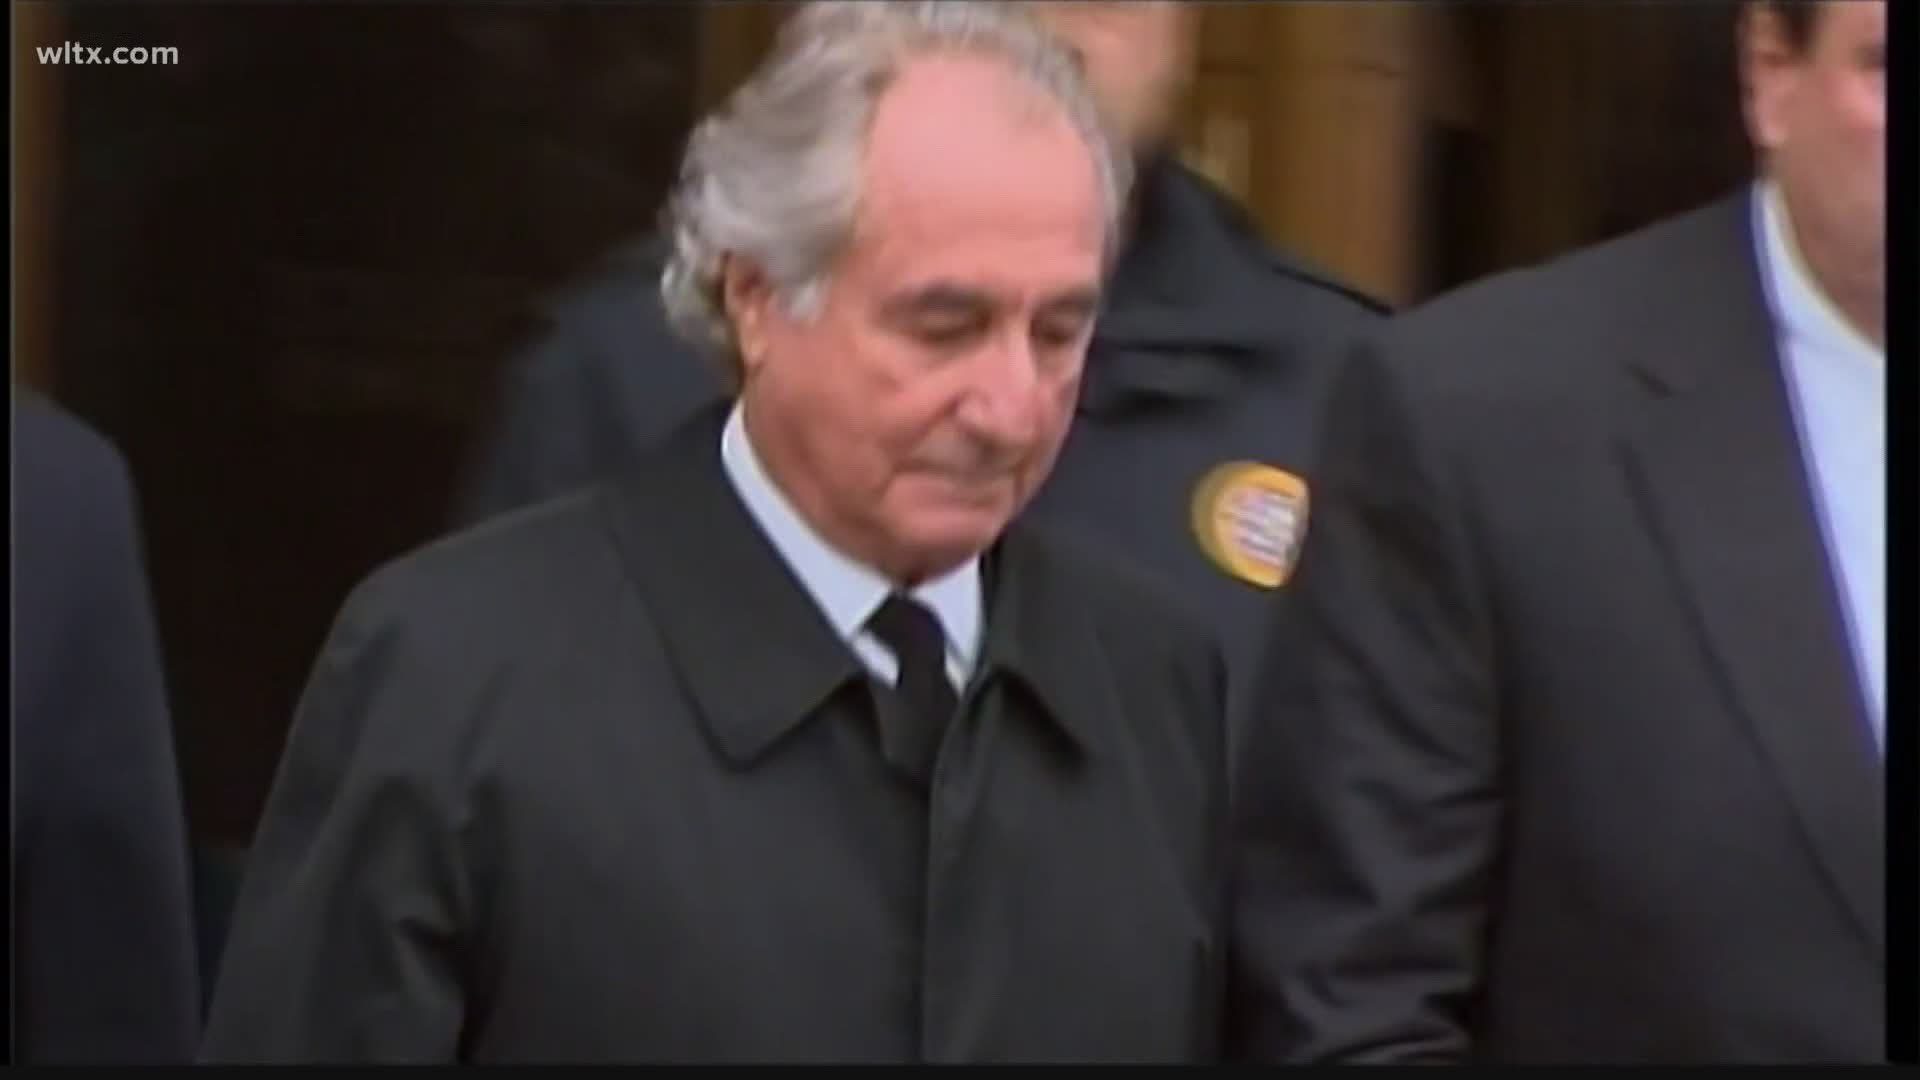 Bernard Madoff was the architect of an epic securities swindle that burned thousands of investors, outfoxed regulators and earned him a 150-year prison term.